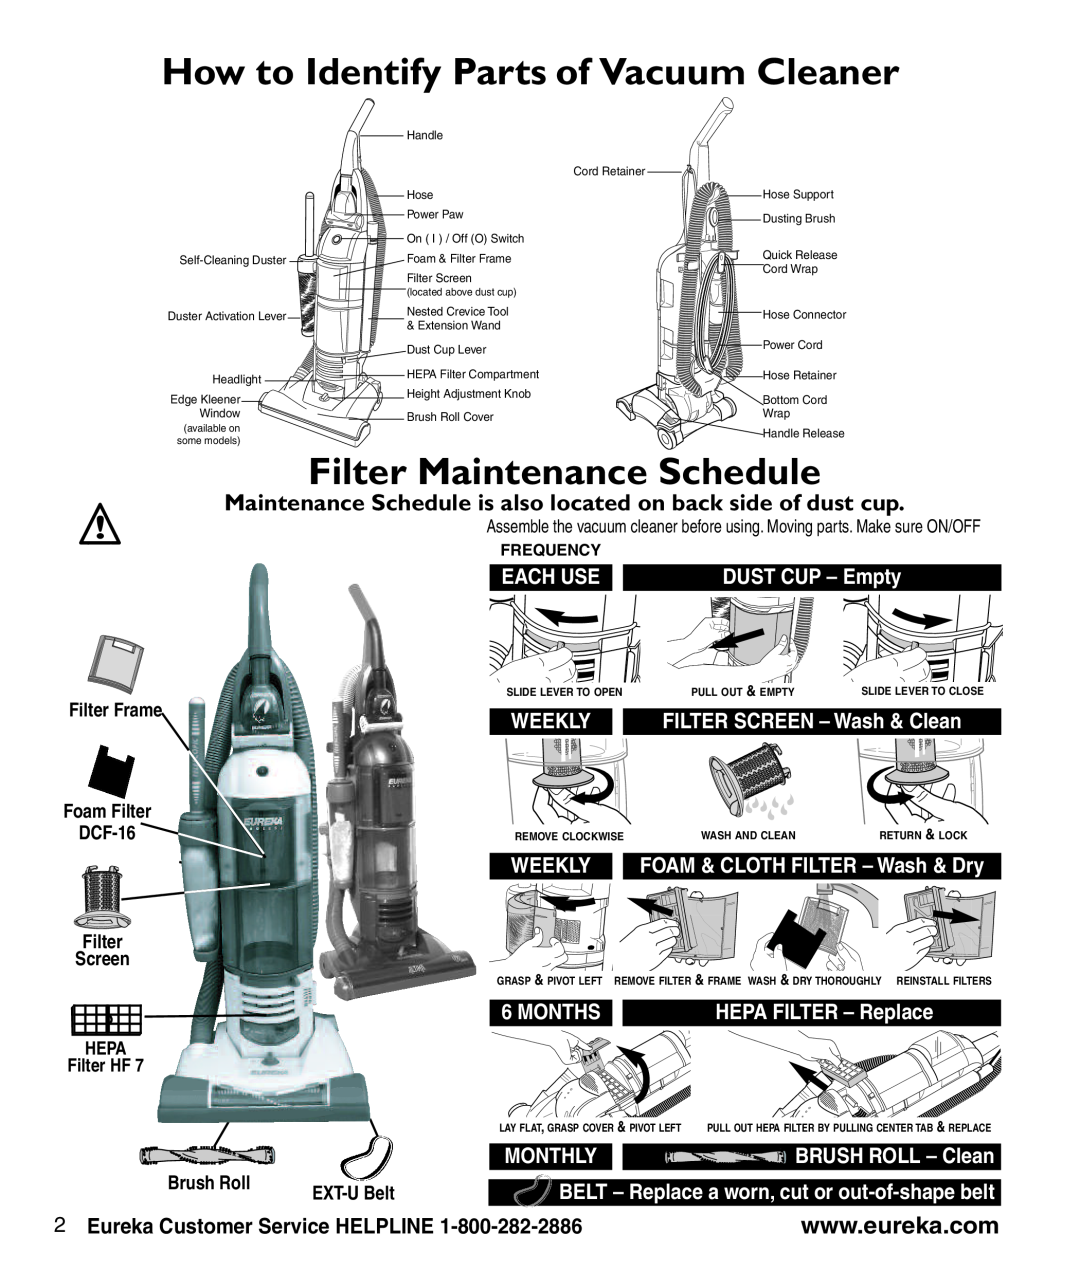 Eureka 2950-2996 Series How to Identify Parts of Vacuum Cleaner, Filter Maintenance Schedule, Filter Frame, Brush Roll 